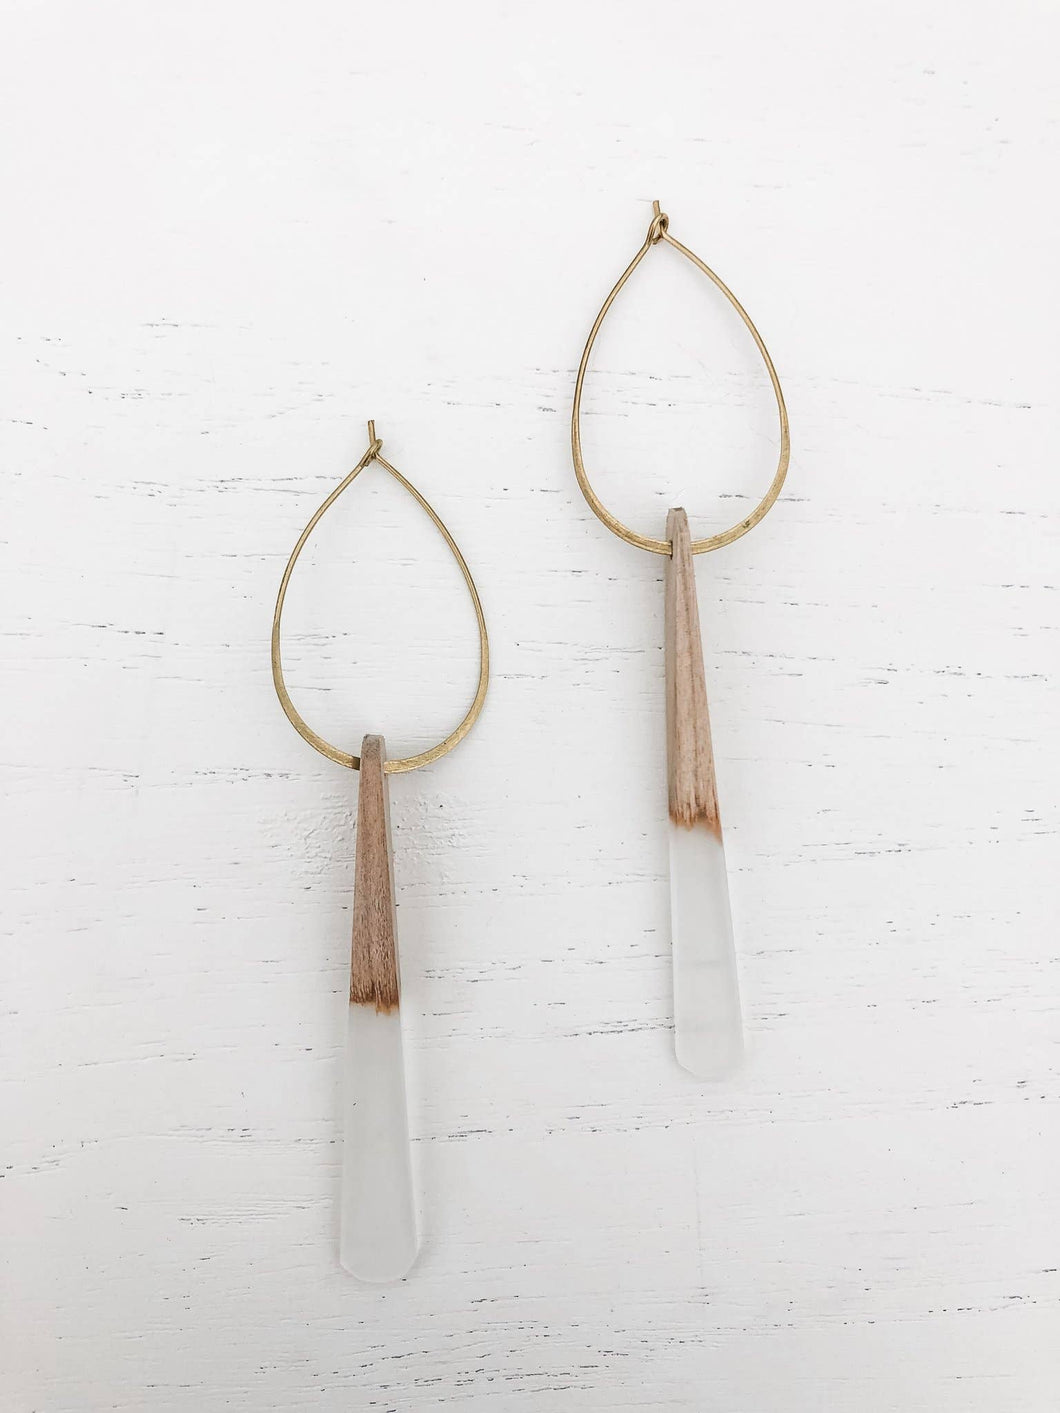 The Mid Century - Wood and Resin Earrings